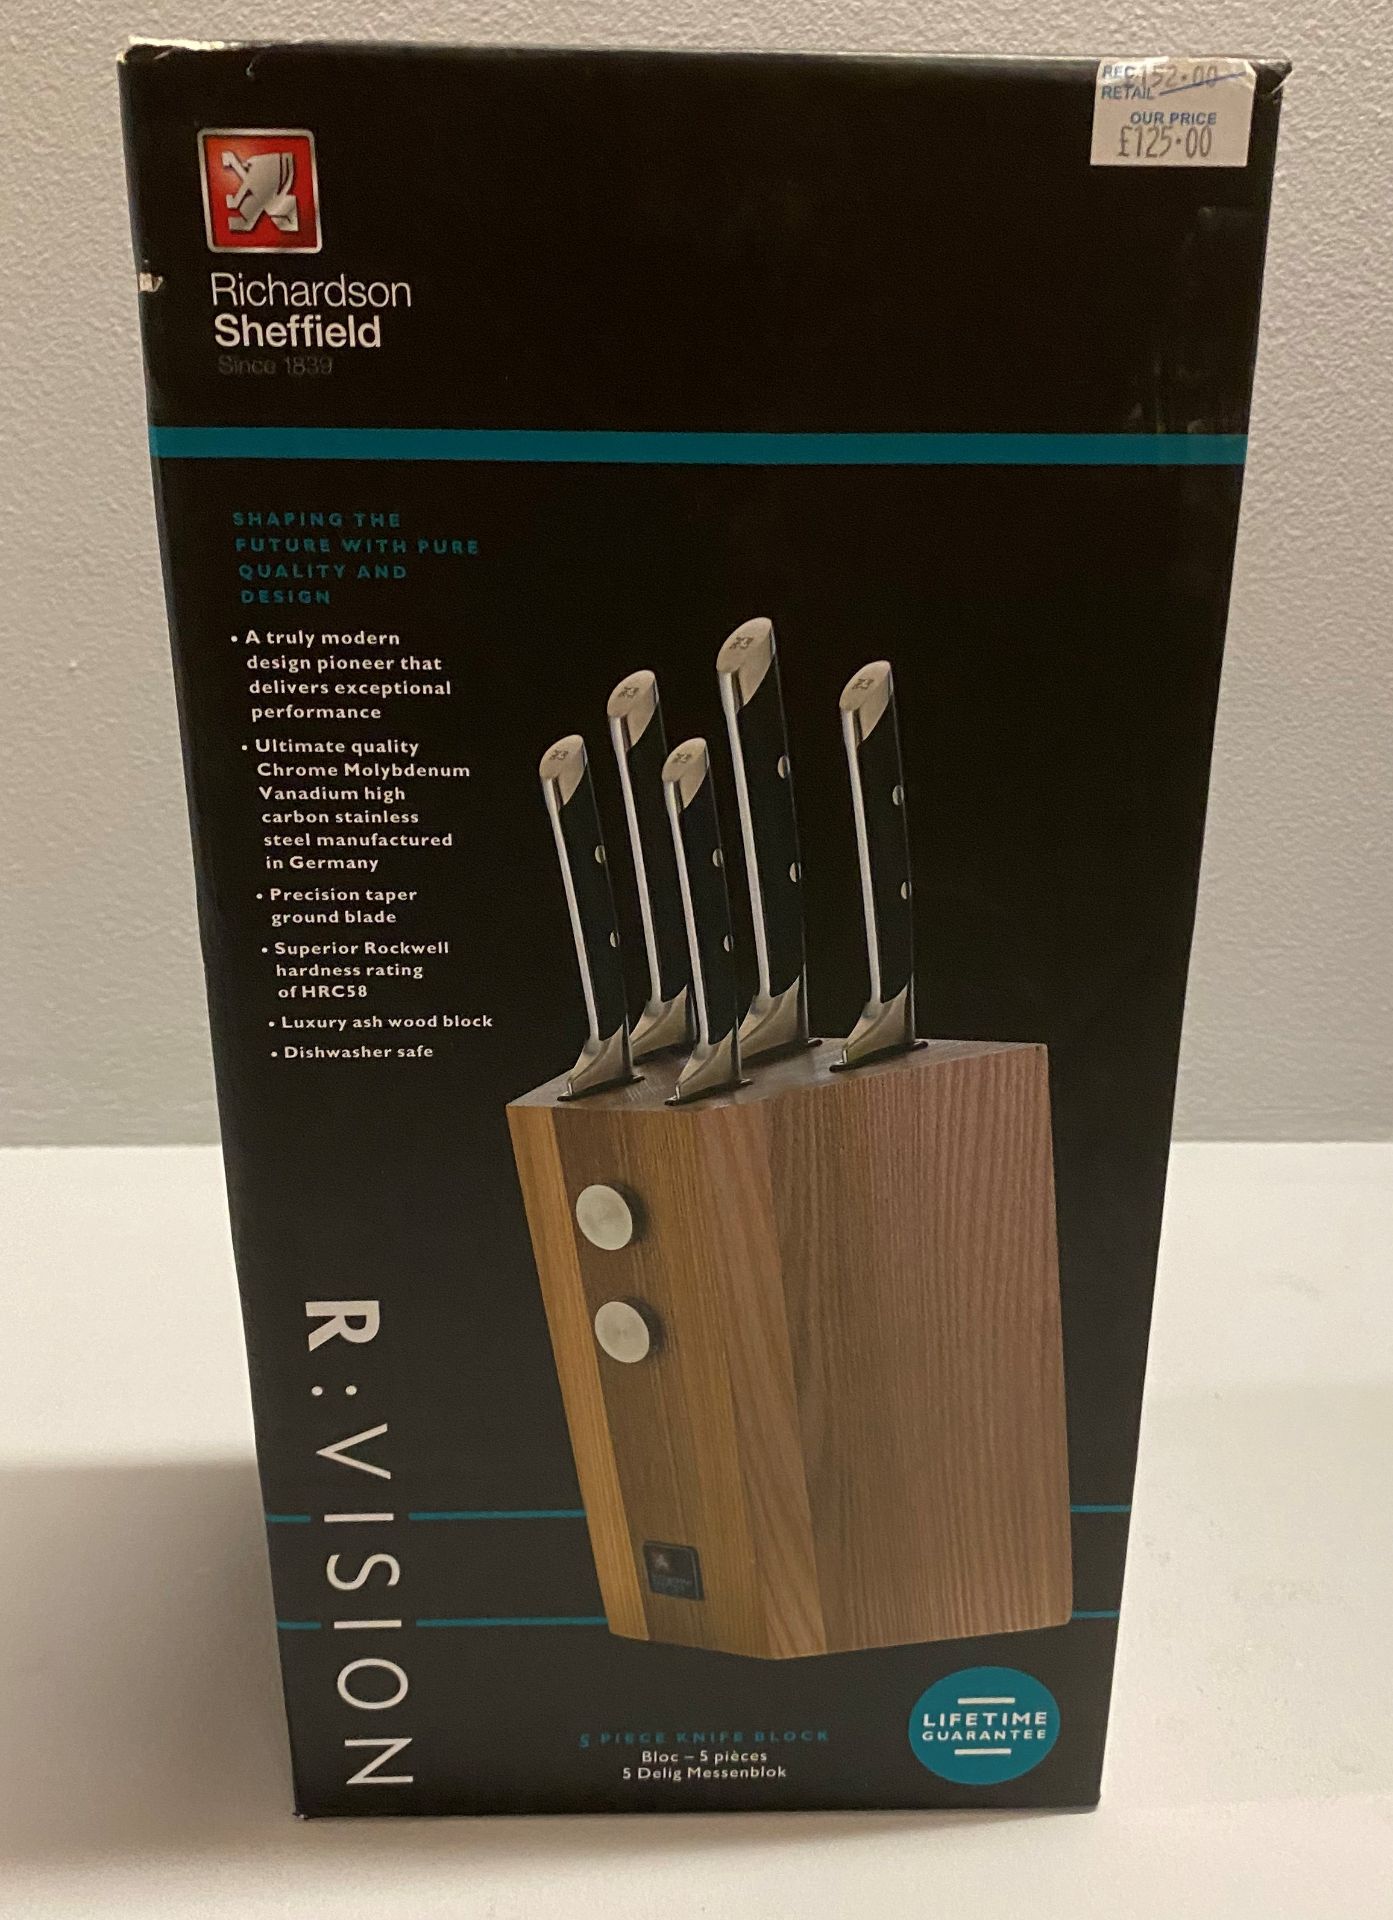 A Richardson Sheffield R:VISION 5 piece stainless steel knife block set RRP £152.